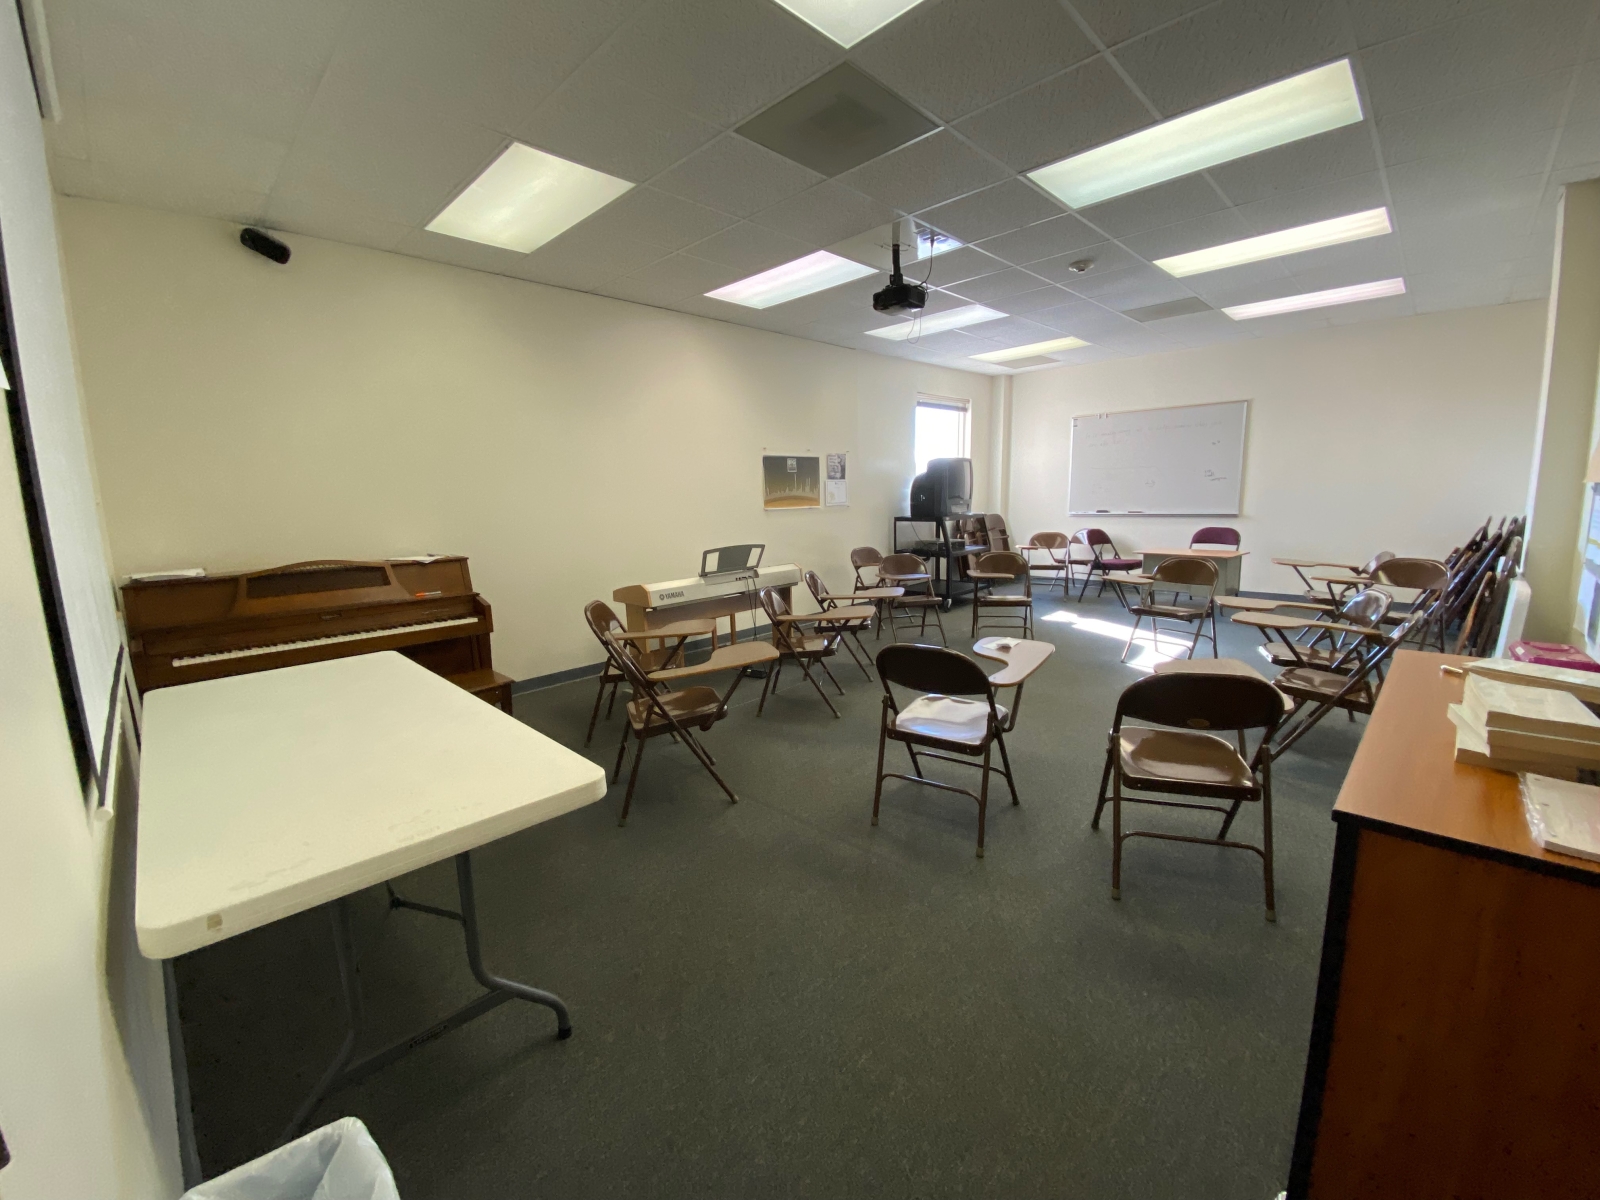 Room 219 has student desks, a whiteboard, a piano, and a table.